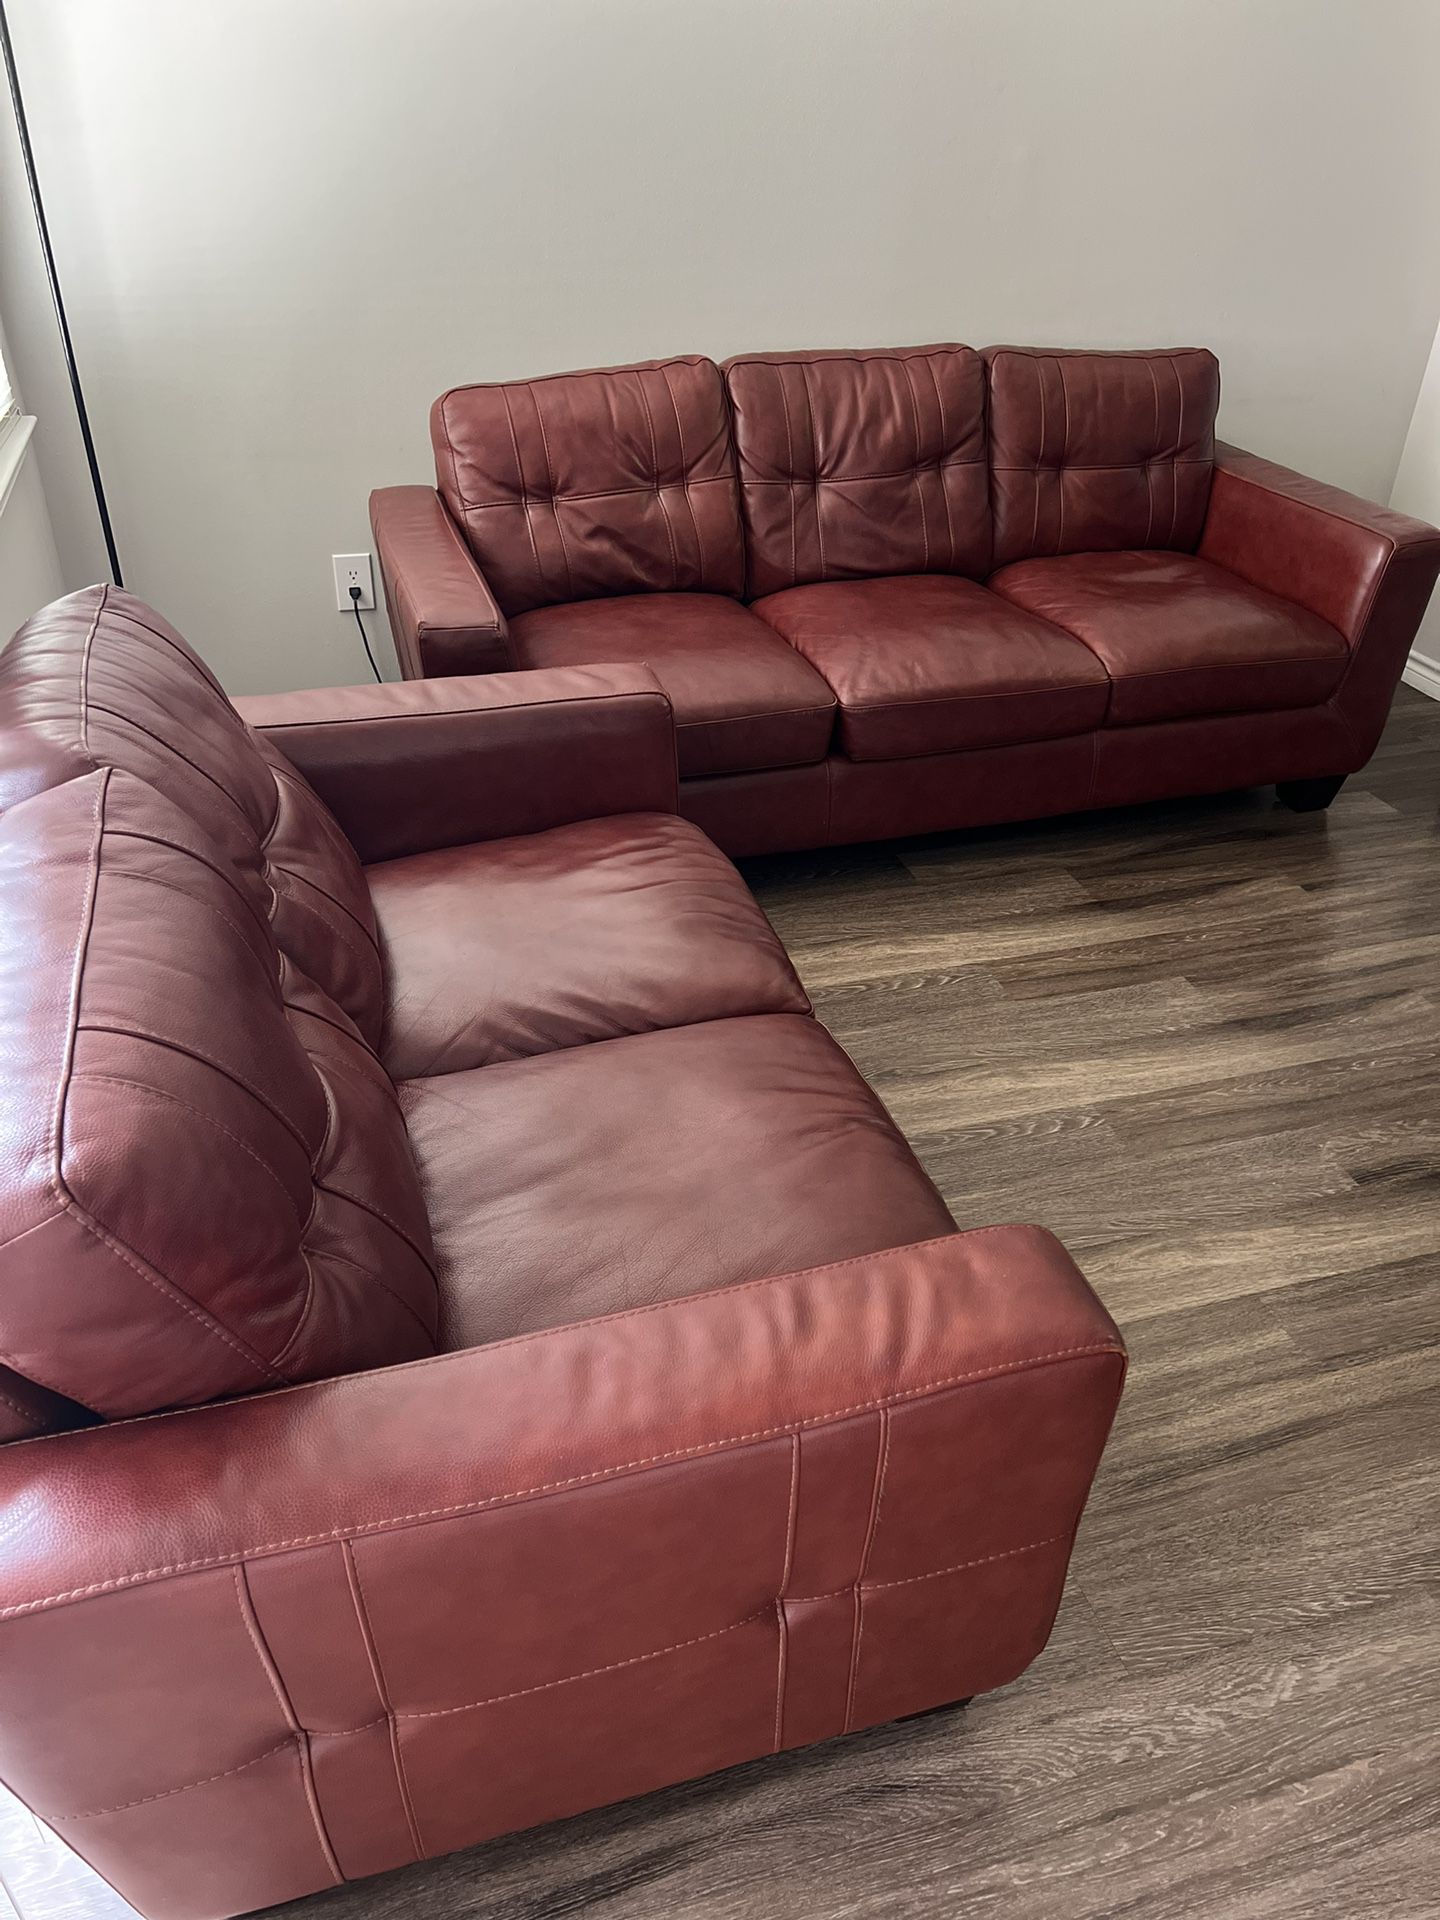 3pc Leather Couches 